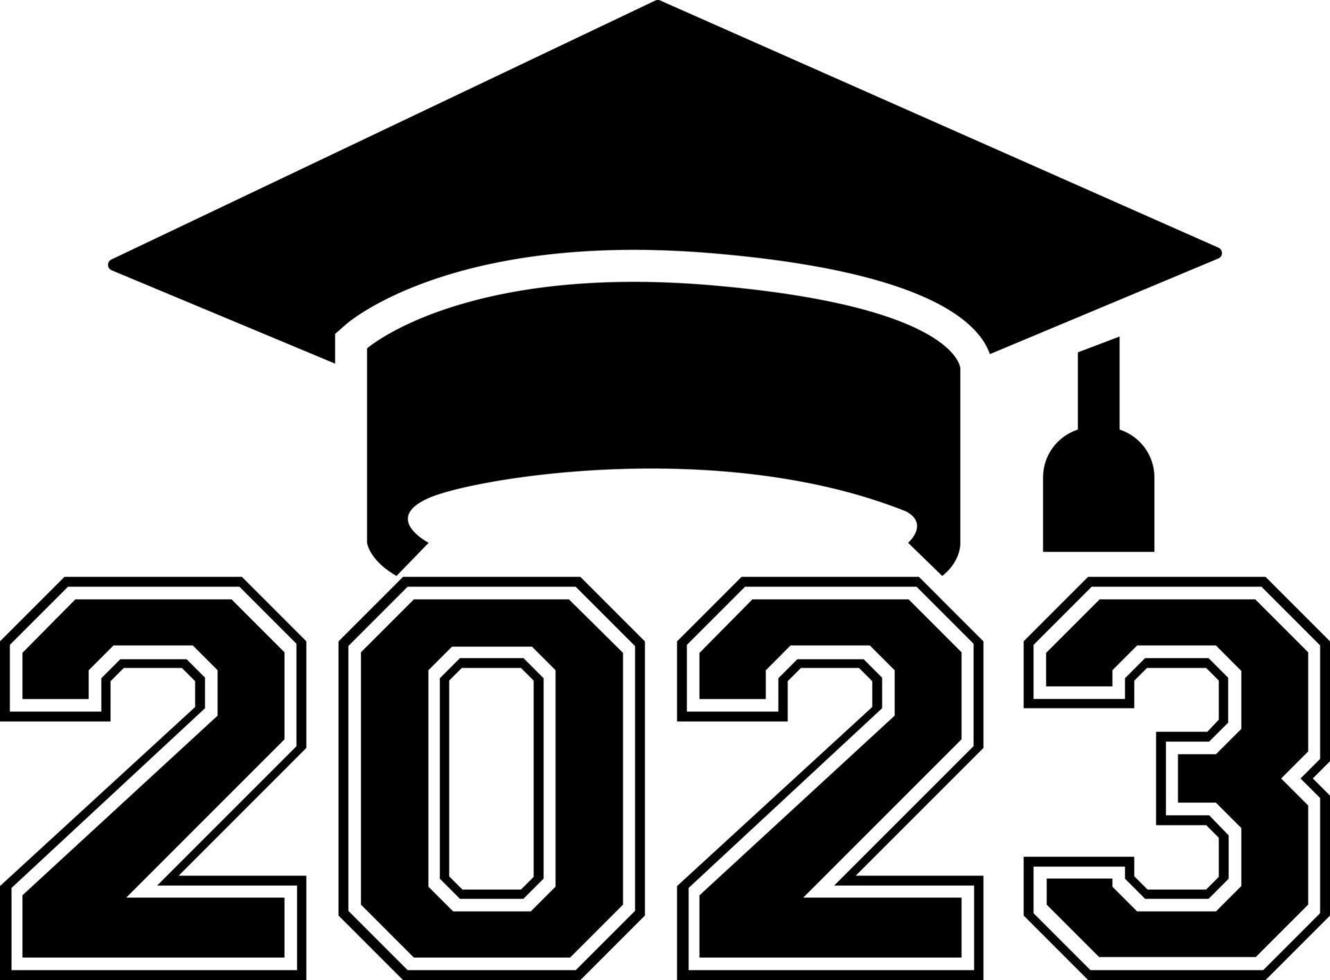 2023 Graduation Cap SVG Class of 2023 black and white design template, Car Window Sticker, POD, cover, Isolated Black Background vector